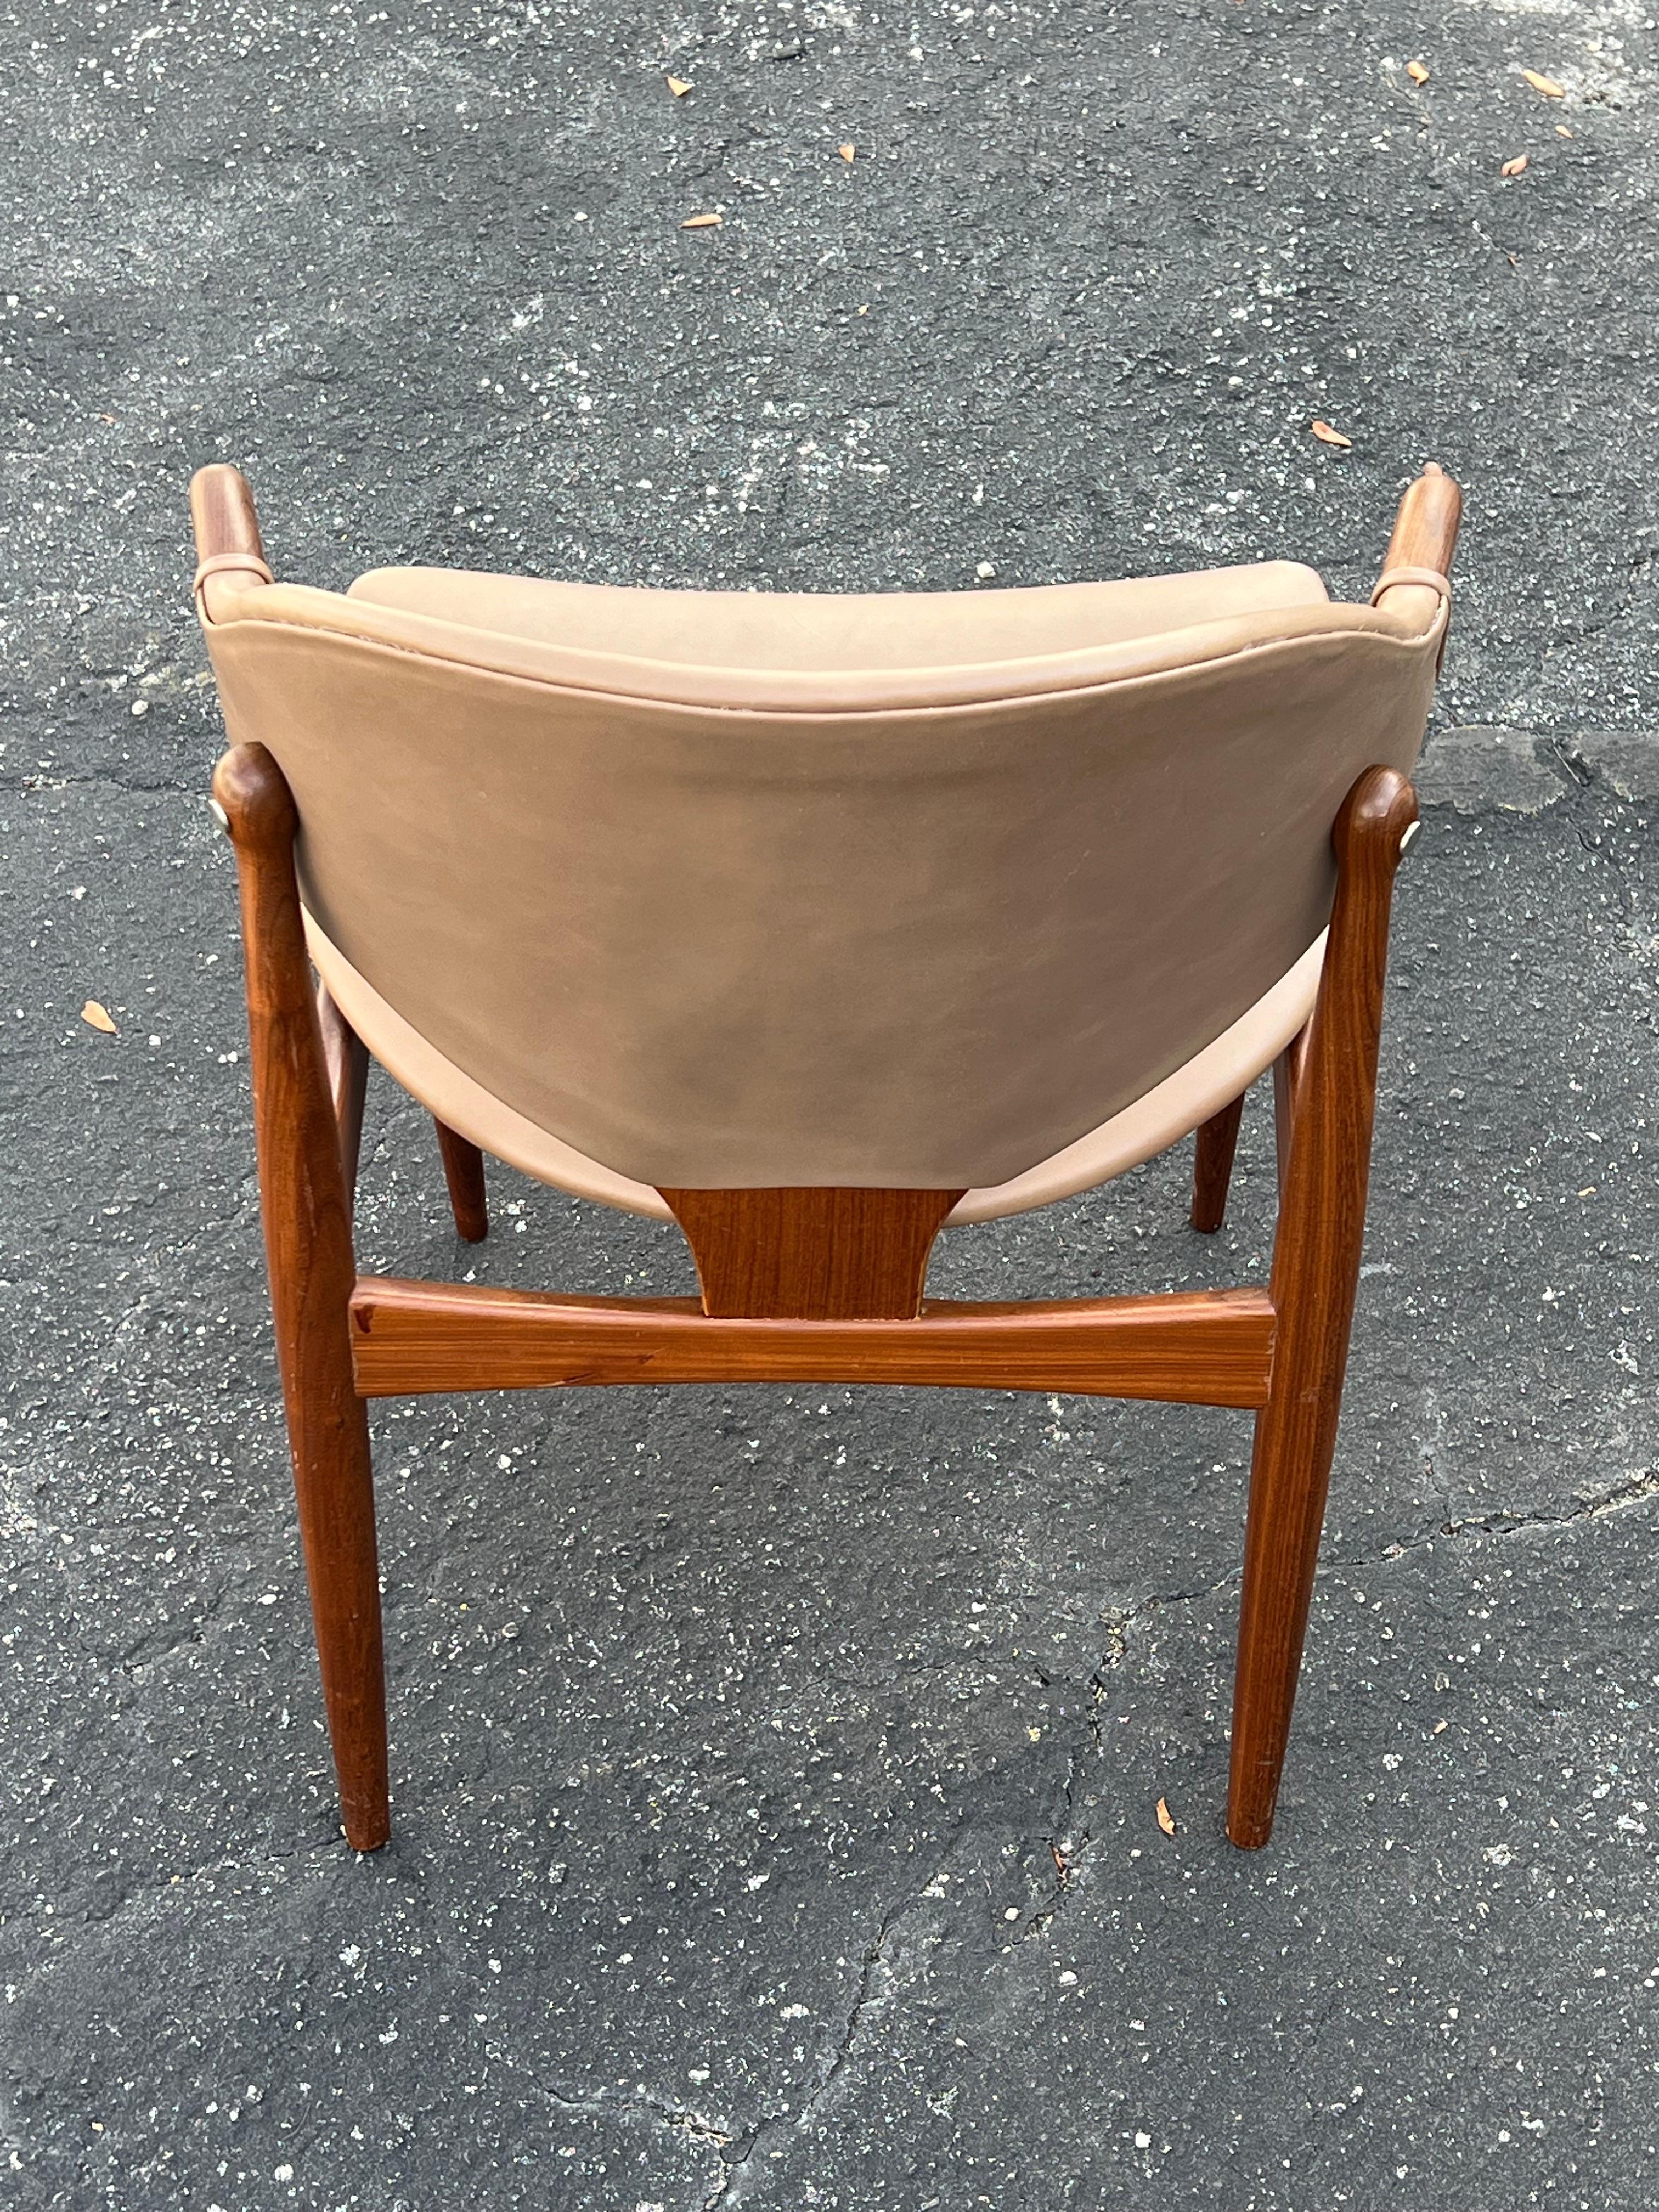 Classic Arne Vodder Leather And Teak Chair For Mahjongg Holland 1964 For Sale 1